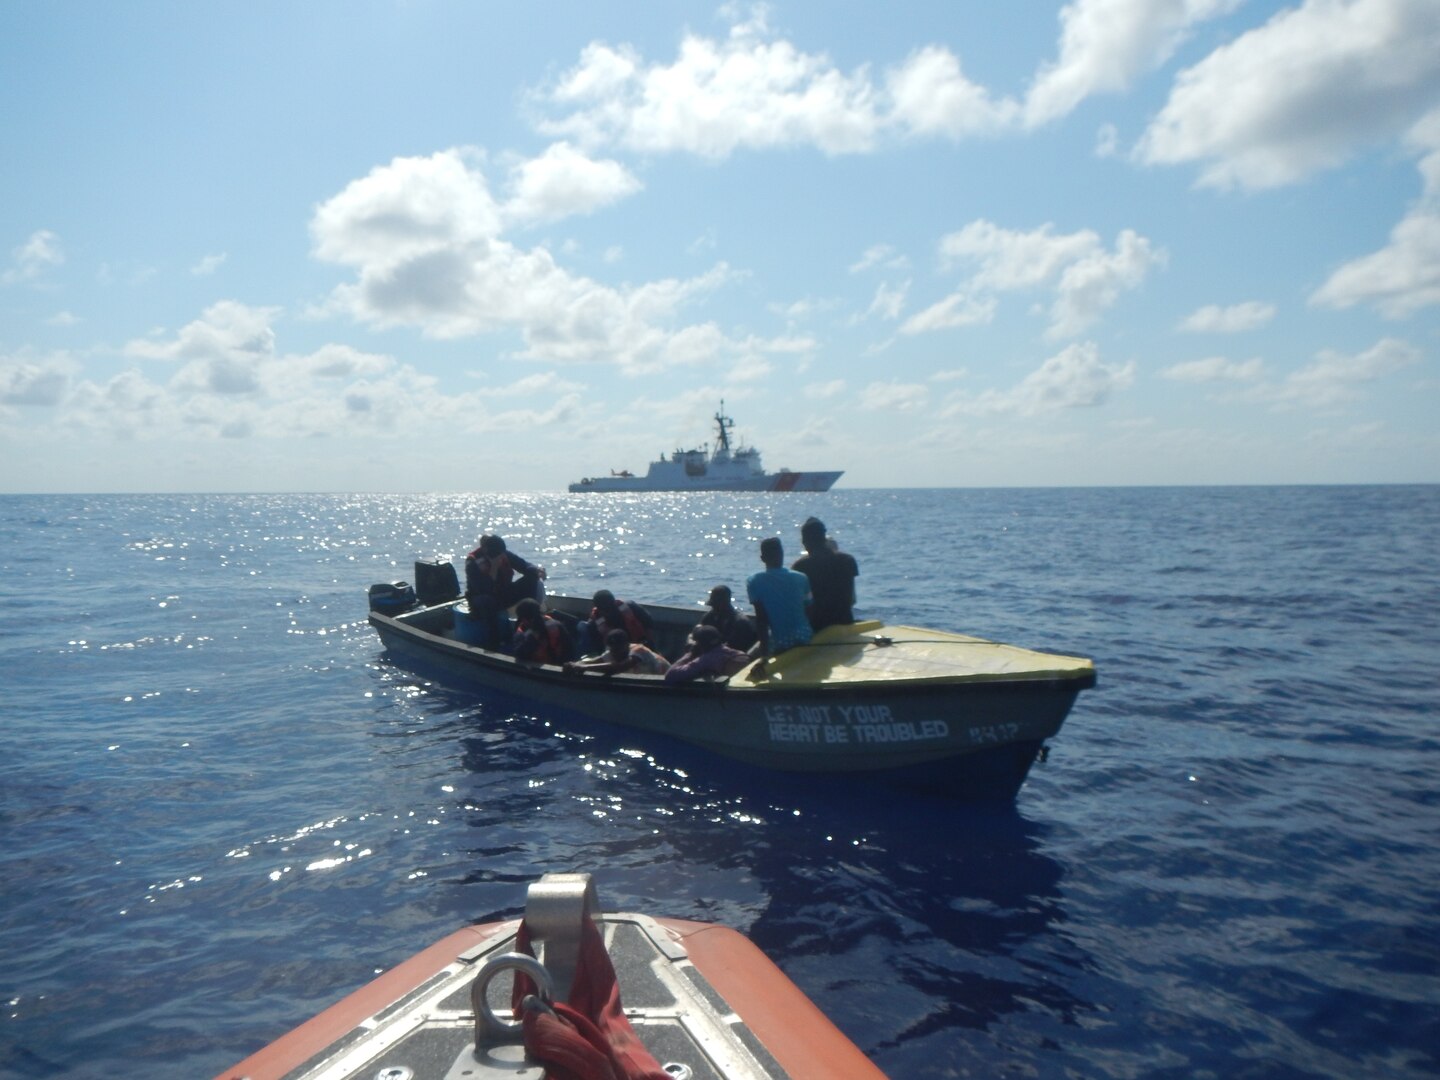 Coast Guard Cutter Hamilton small boat crew boards a suspected smuggling vessel while the Hamilton maintains security in the background March 22, 2019, in the Caribbean Sea.